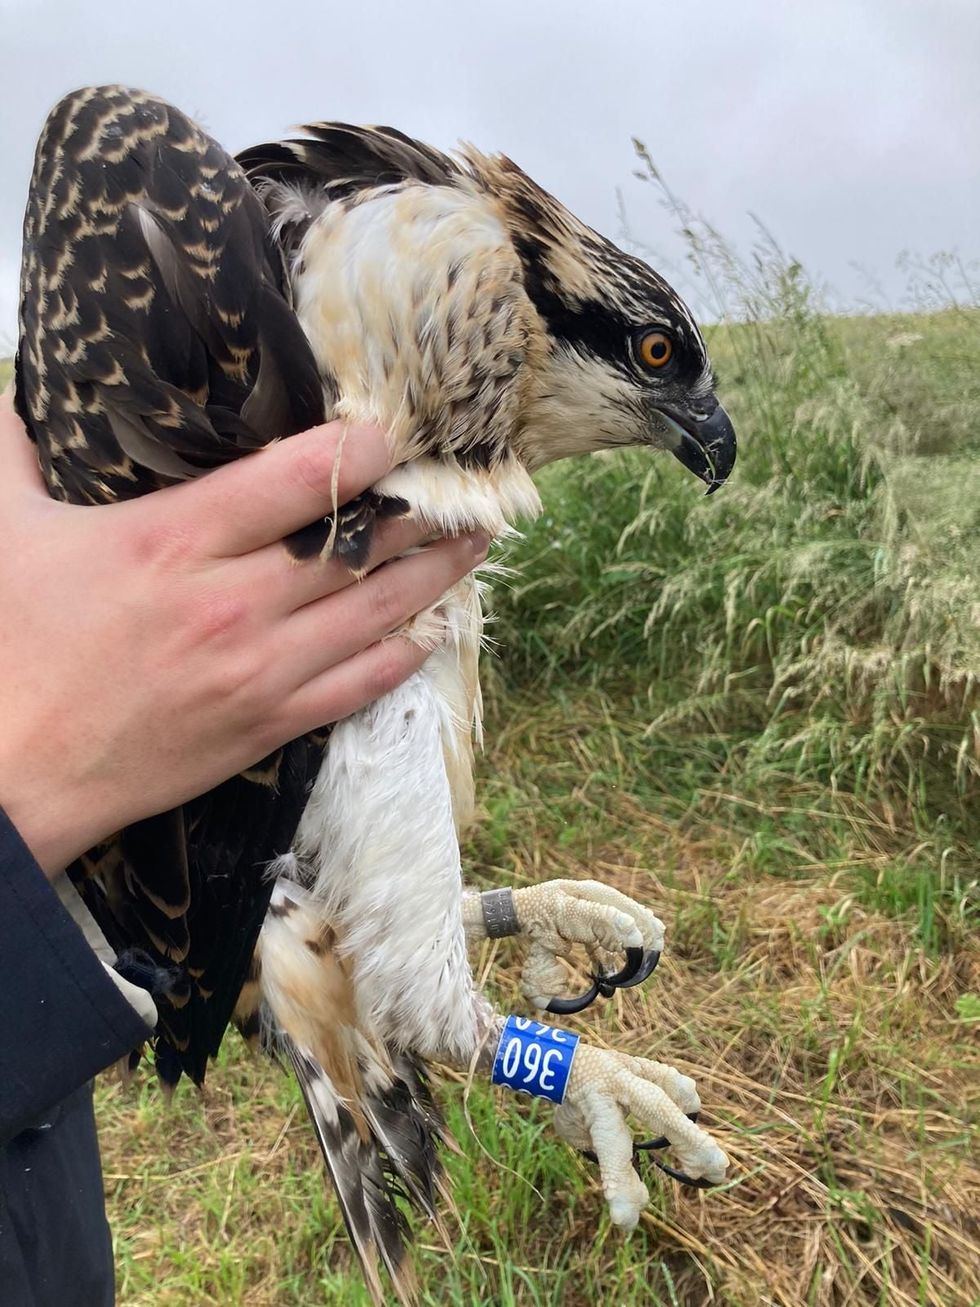 An osprey chick at Rutland Water, the 200th bird to hatch since a programme to reintroduce the birds to England was set up in 1996. (Abi Mustard/Leicestershire and Rutland Wildlife Trust)